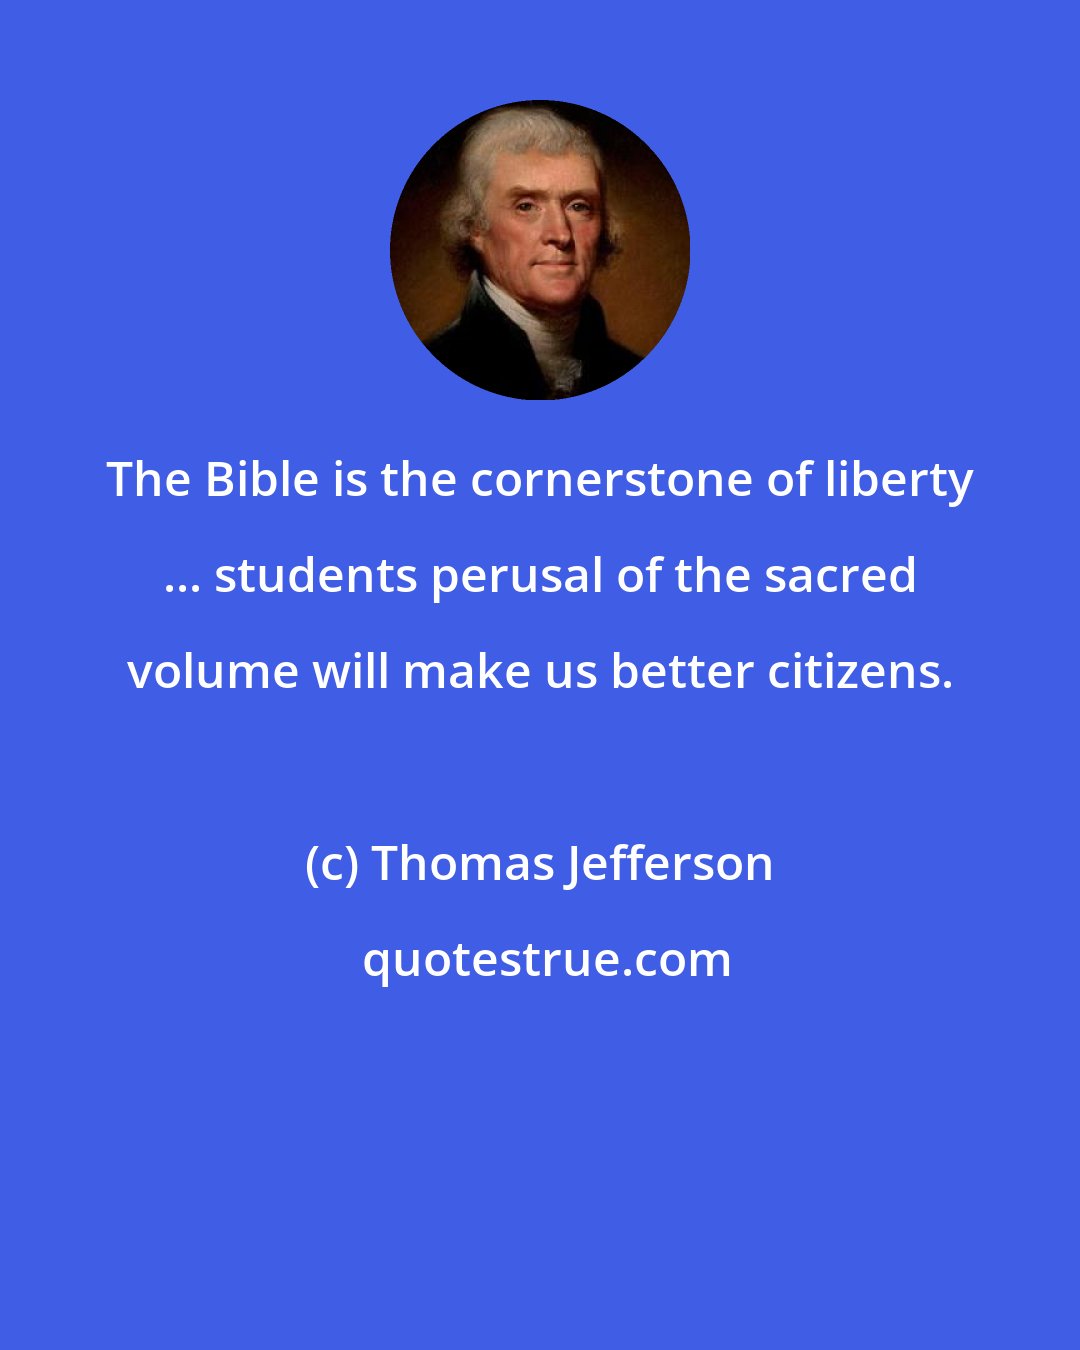 Thomas Jefferson: The Bible is the cornerstone of liberty ... students perusal of the sacred volume will make us better citizens.